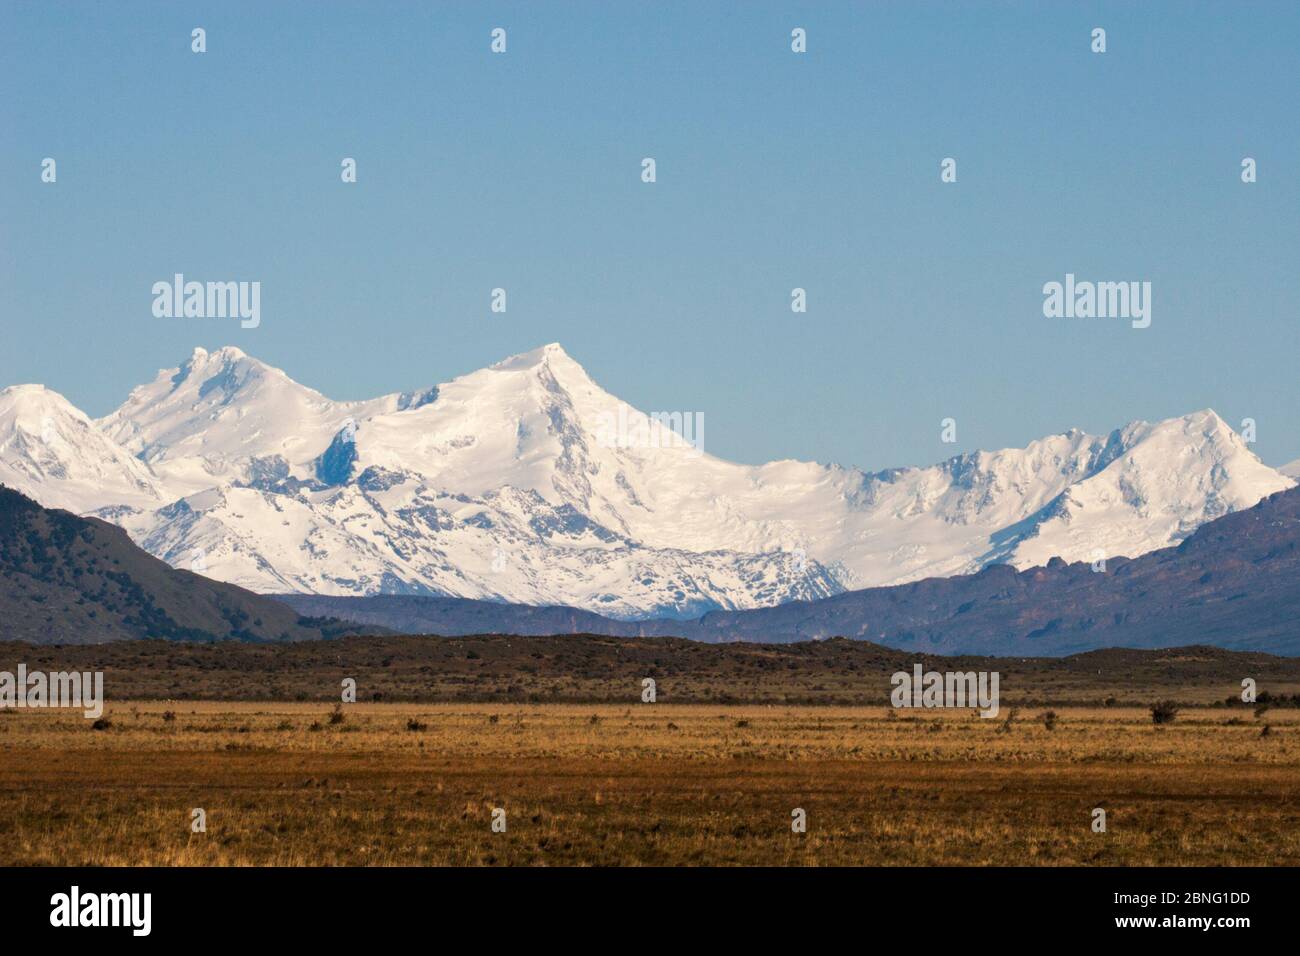 Snow covered Andes Mountains and Patagonian steppe landscape in Santa Cruz province, Argentina Stock Photo